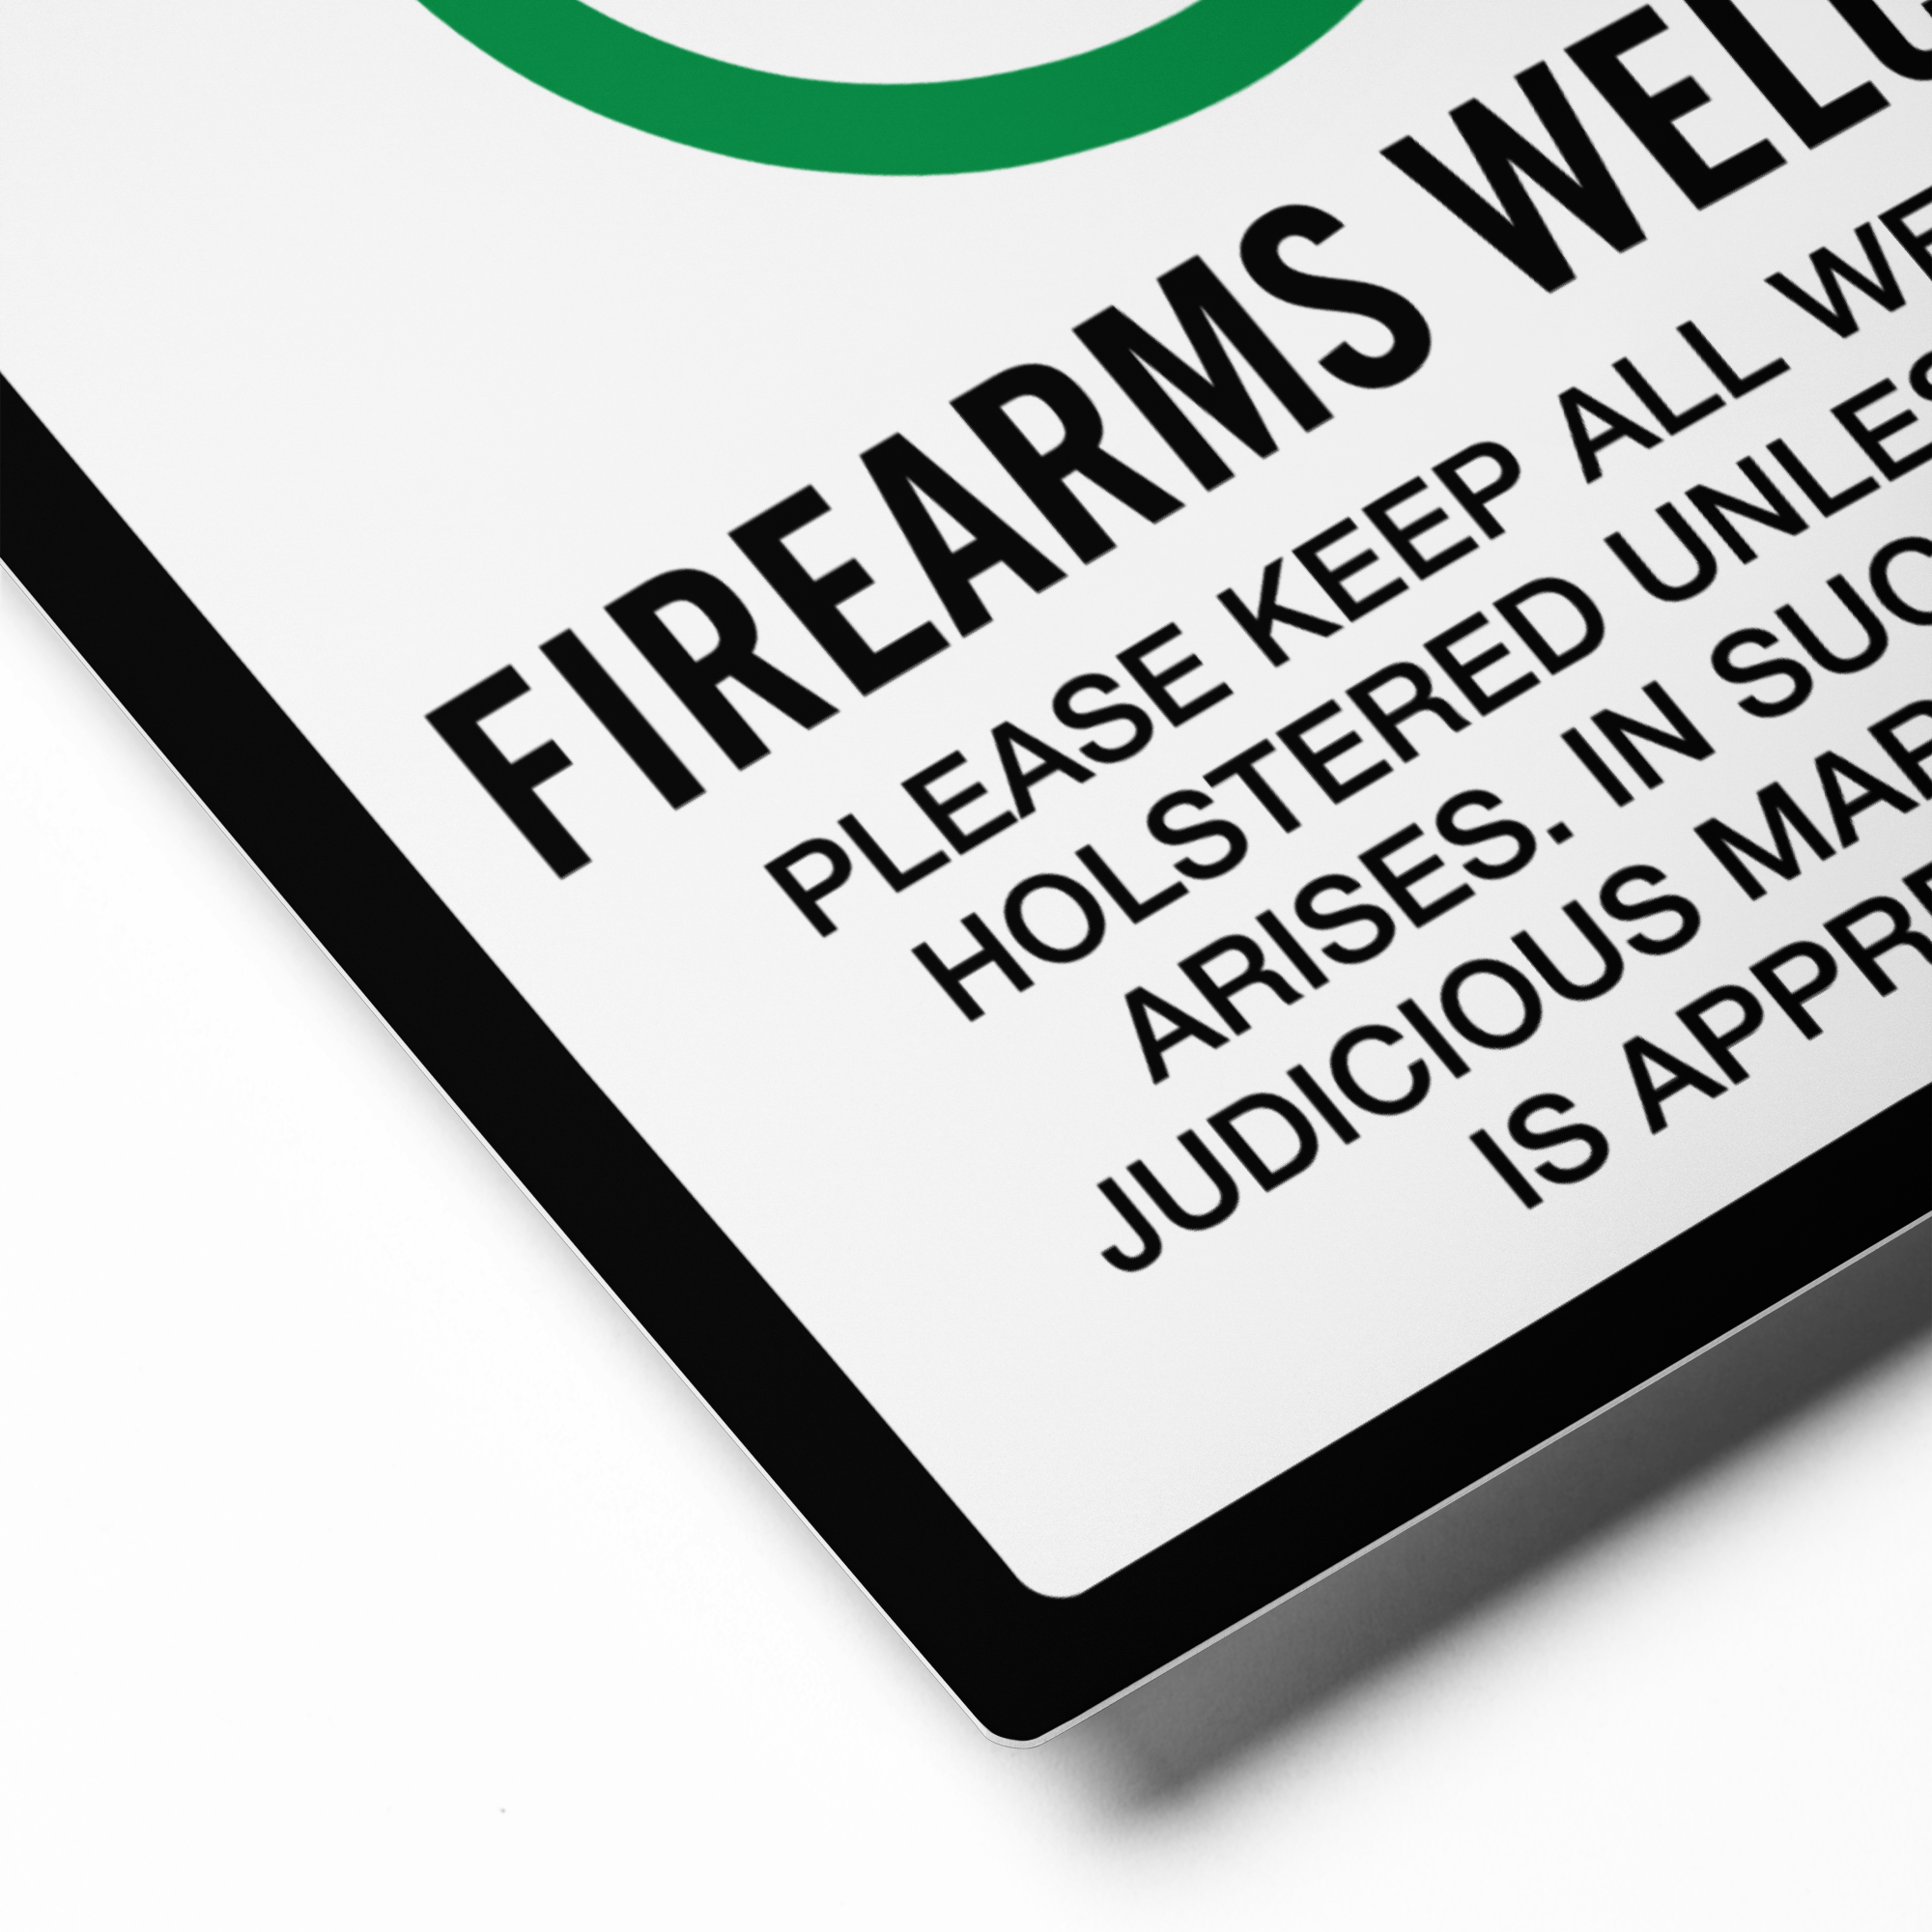 Firearms Welcome Metal Made in the USA Sign